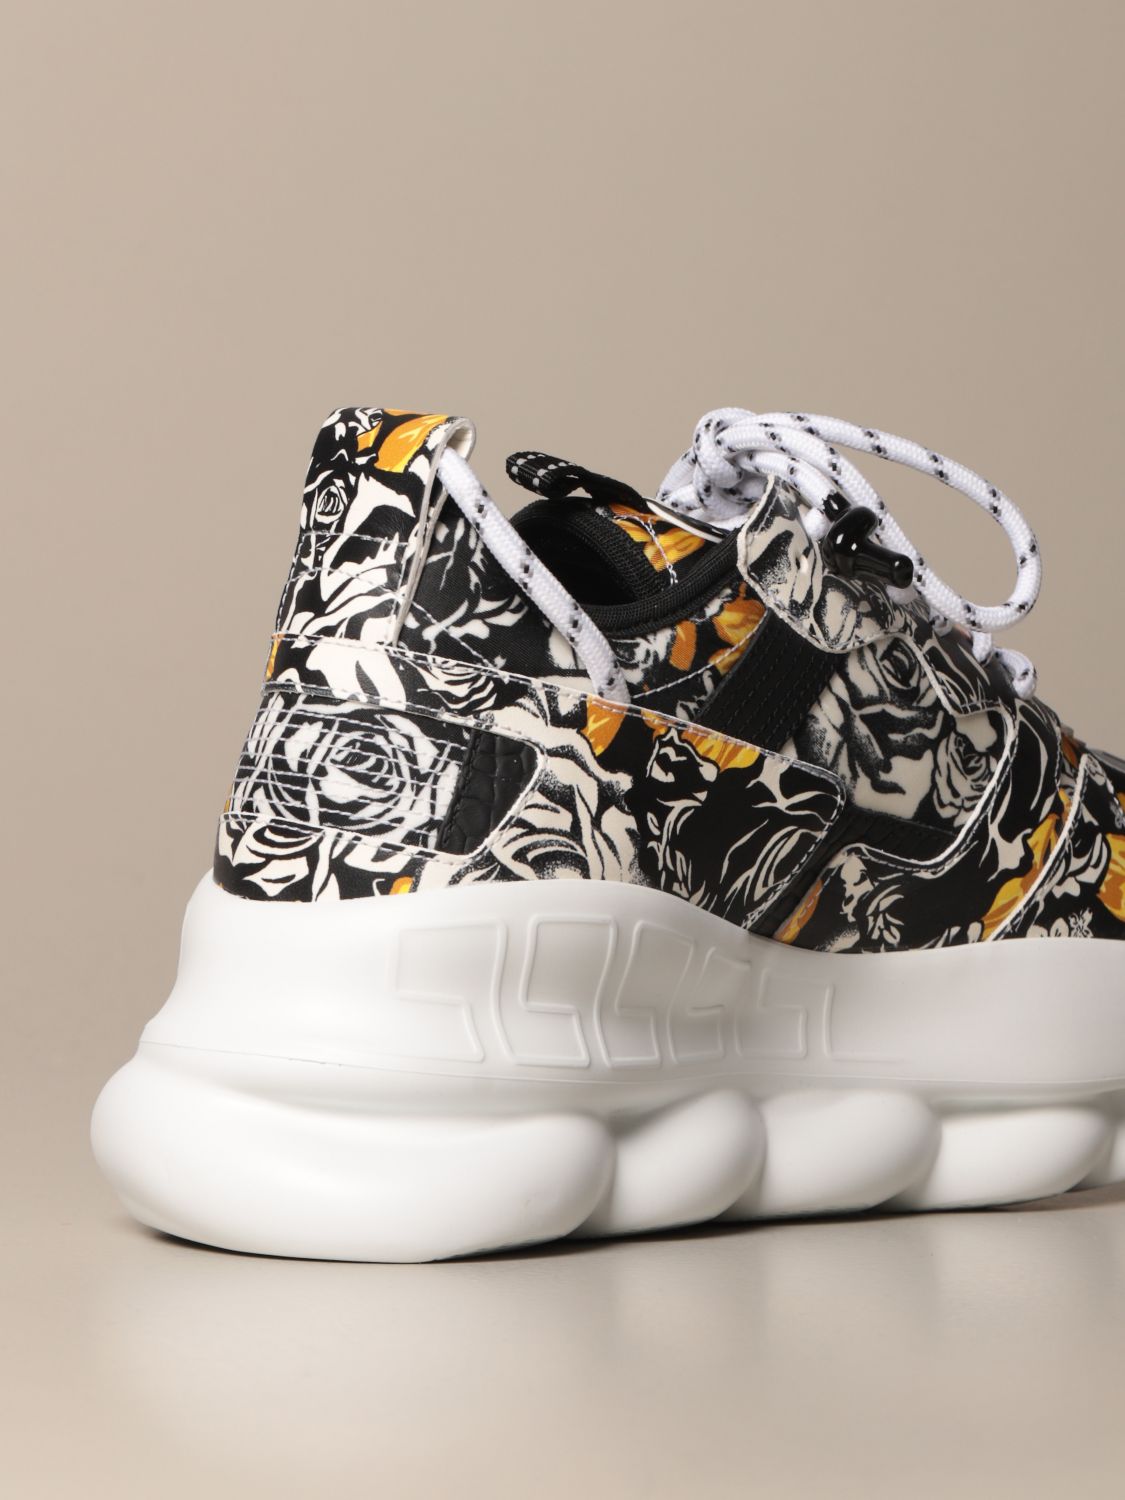 Versace Chain reaction sneakers in baroque / floral leather